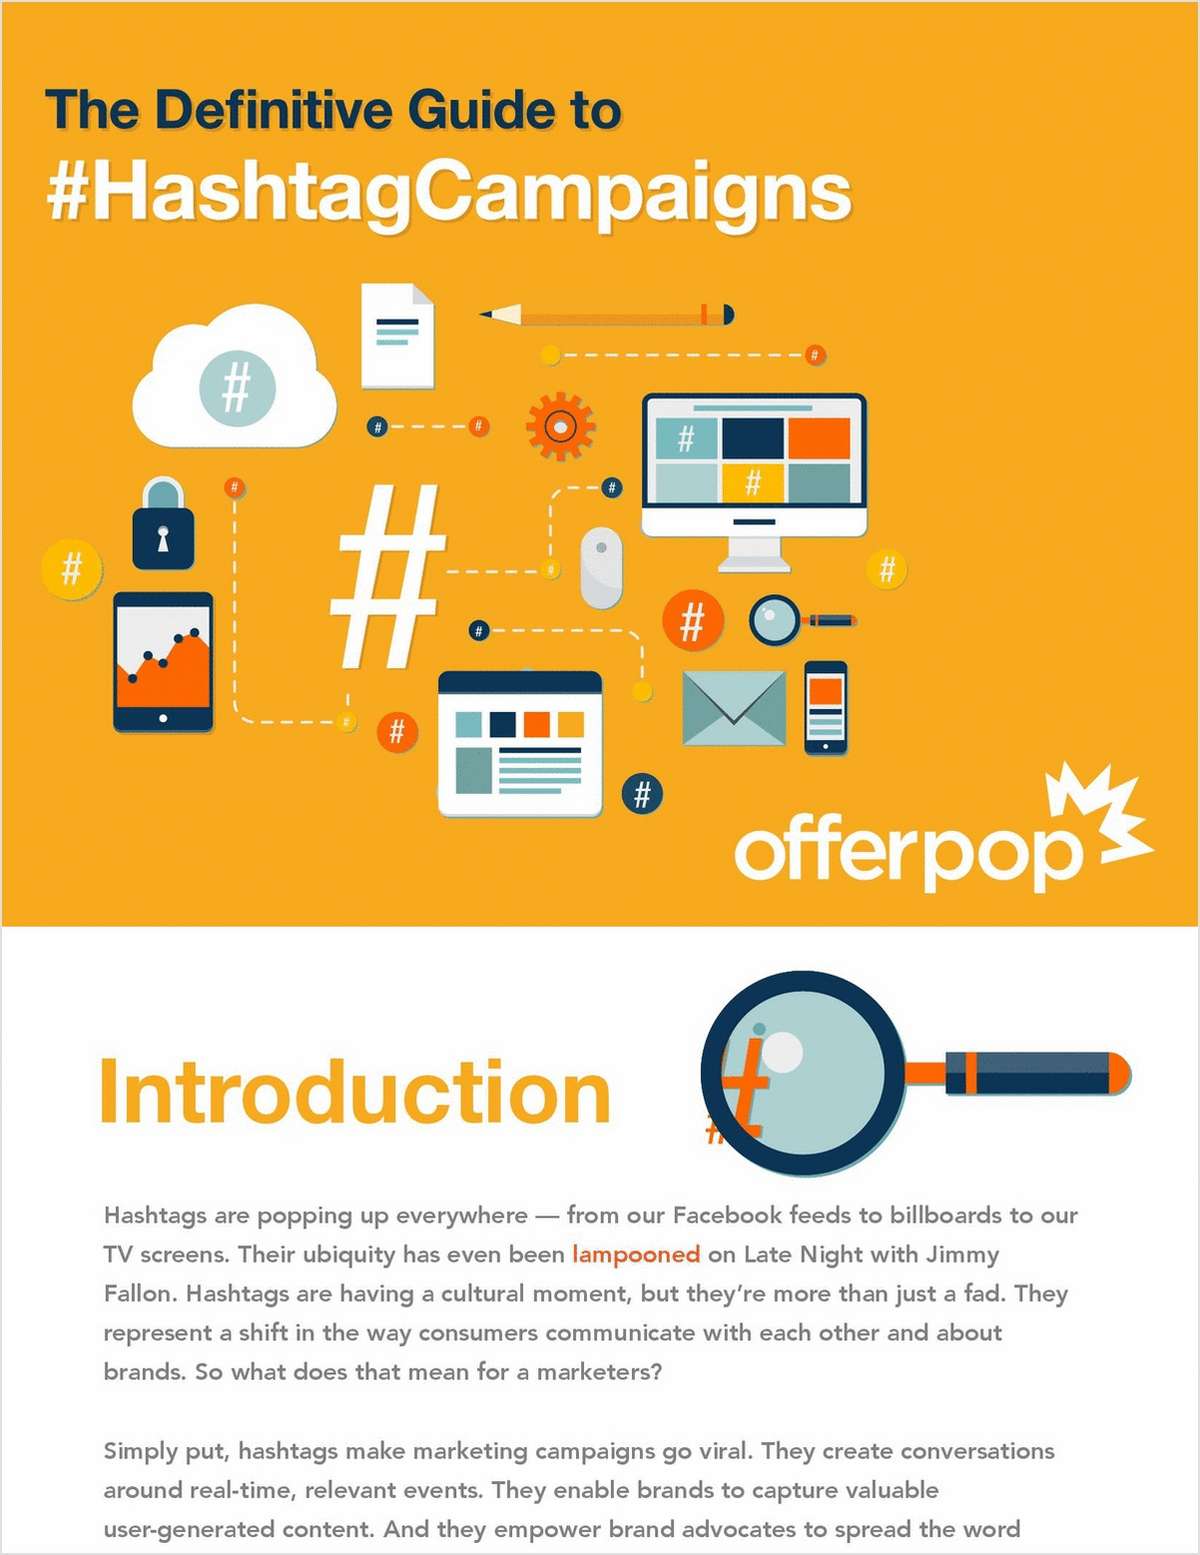 The Definitive Guide to #HashtagCampaigns